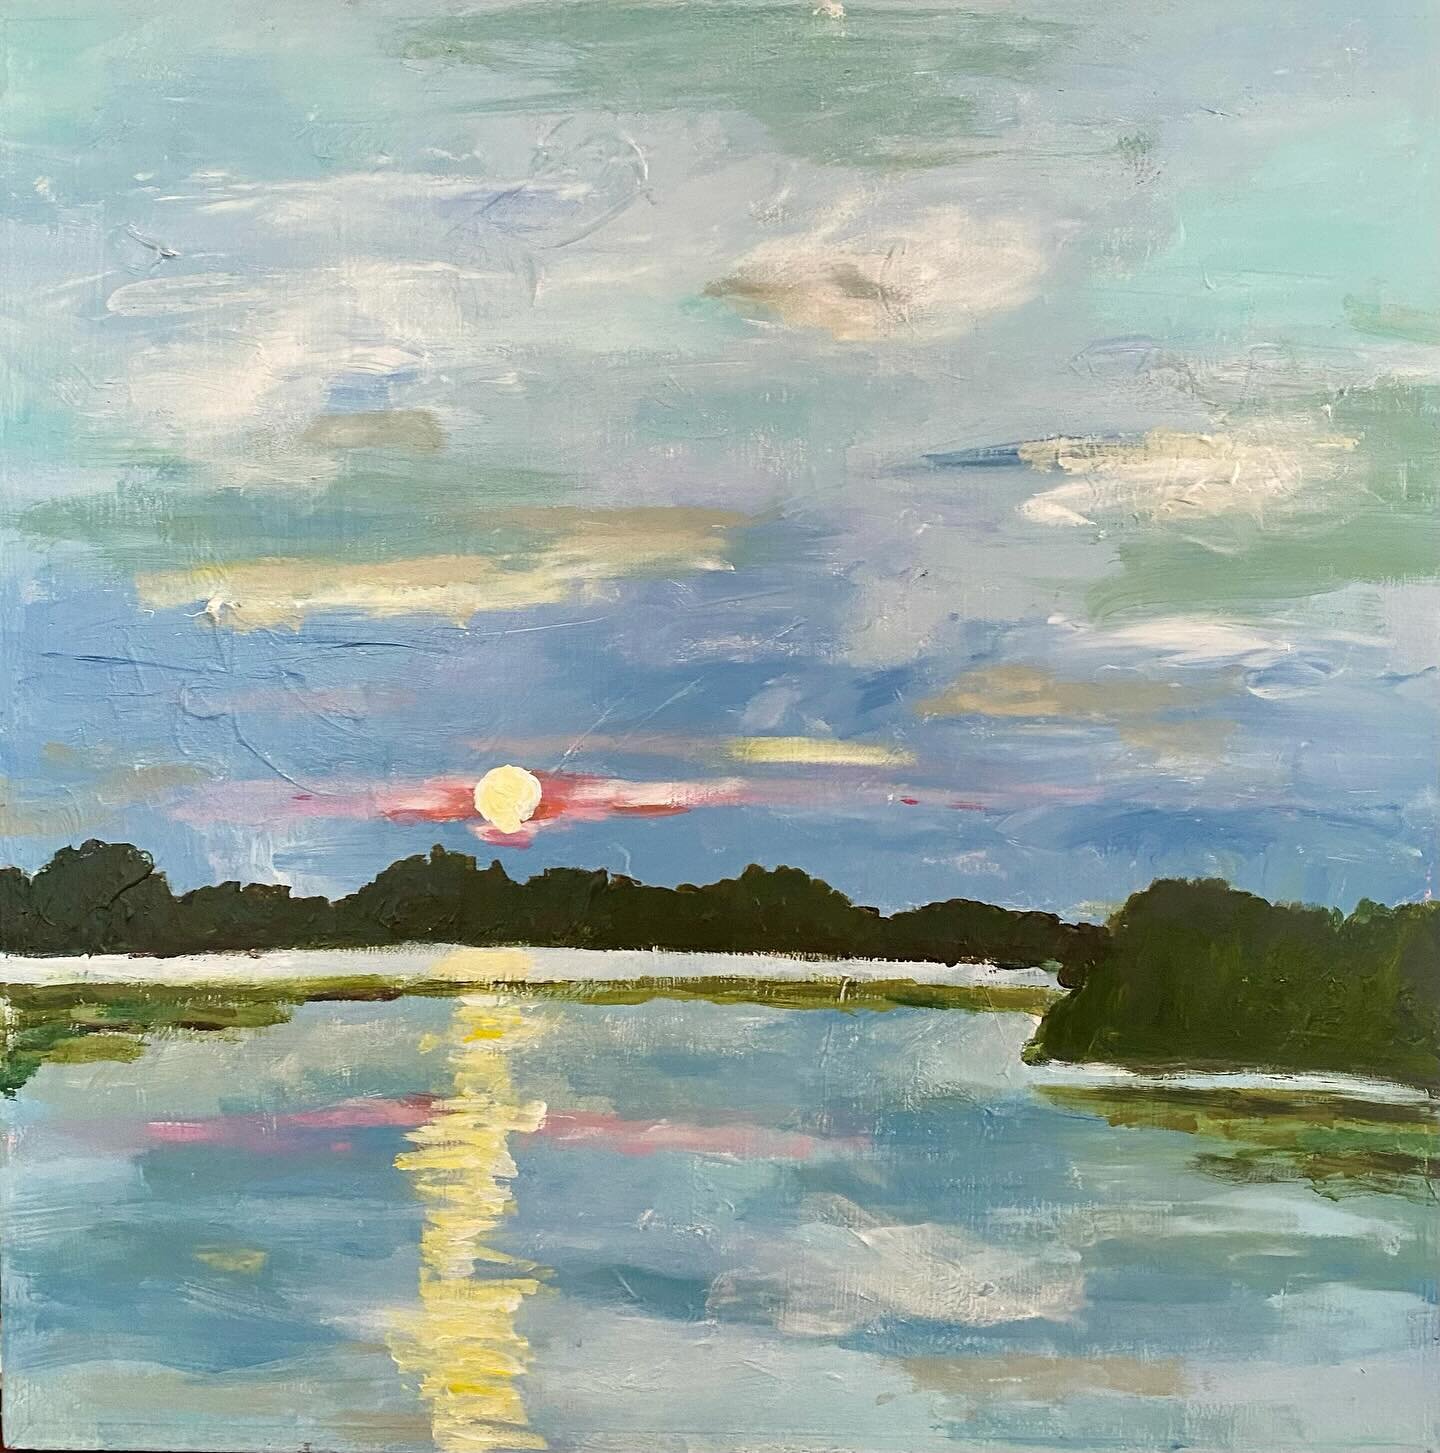 Happy Easter! &ldquo;Summer Sunset&rdquo; 12x12 on wood 
This might still be a work in progress:)